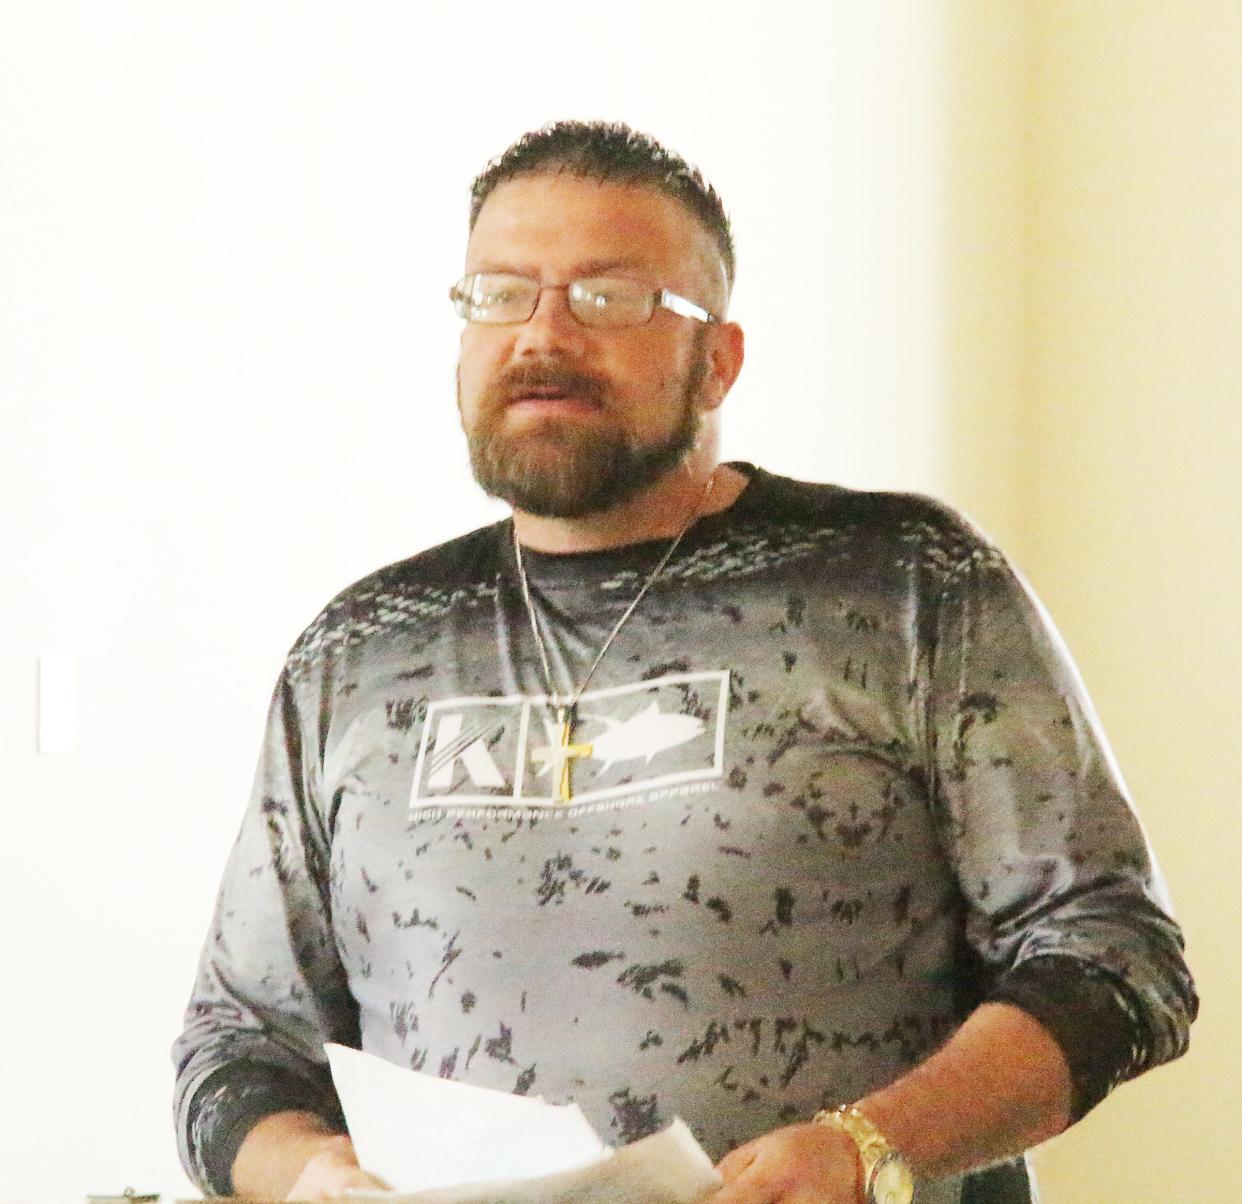 Charles Phinney addresses the audience at his drug court graduation ceremony Friday, March 31. Phinney, who has been sober for 14 months, made it through the program in 18 months and one week.